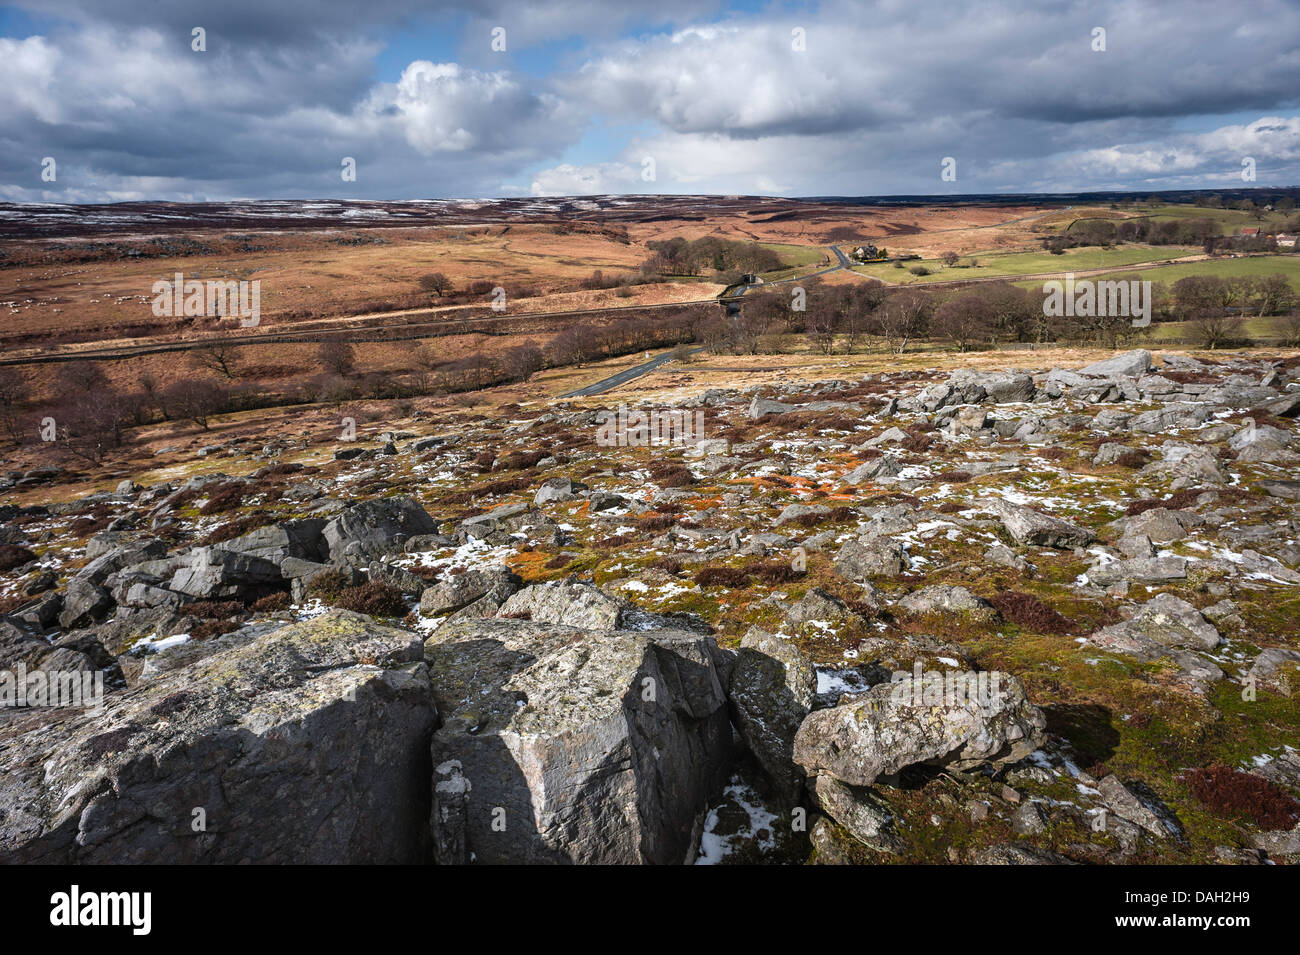 The North York Moors National Park and the undulating landscape with rocks from the Jurassic near Goathland, Yorkshire, UK. Stock Photo